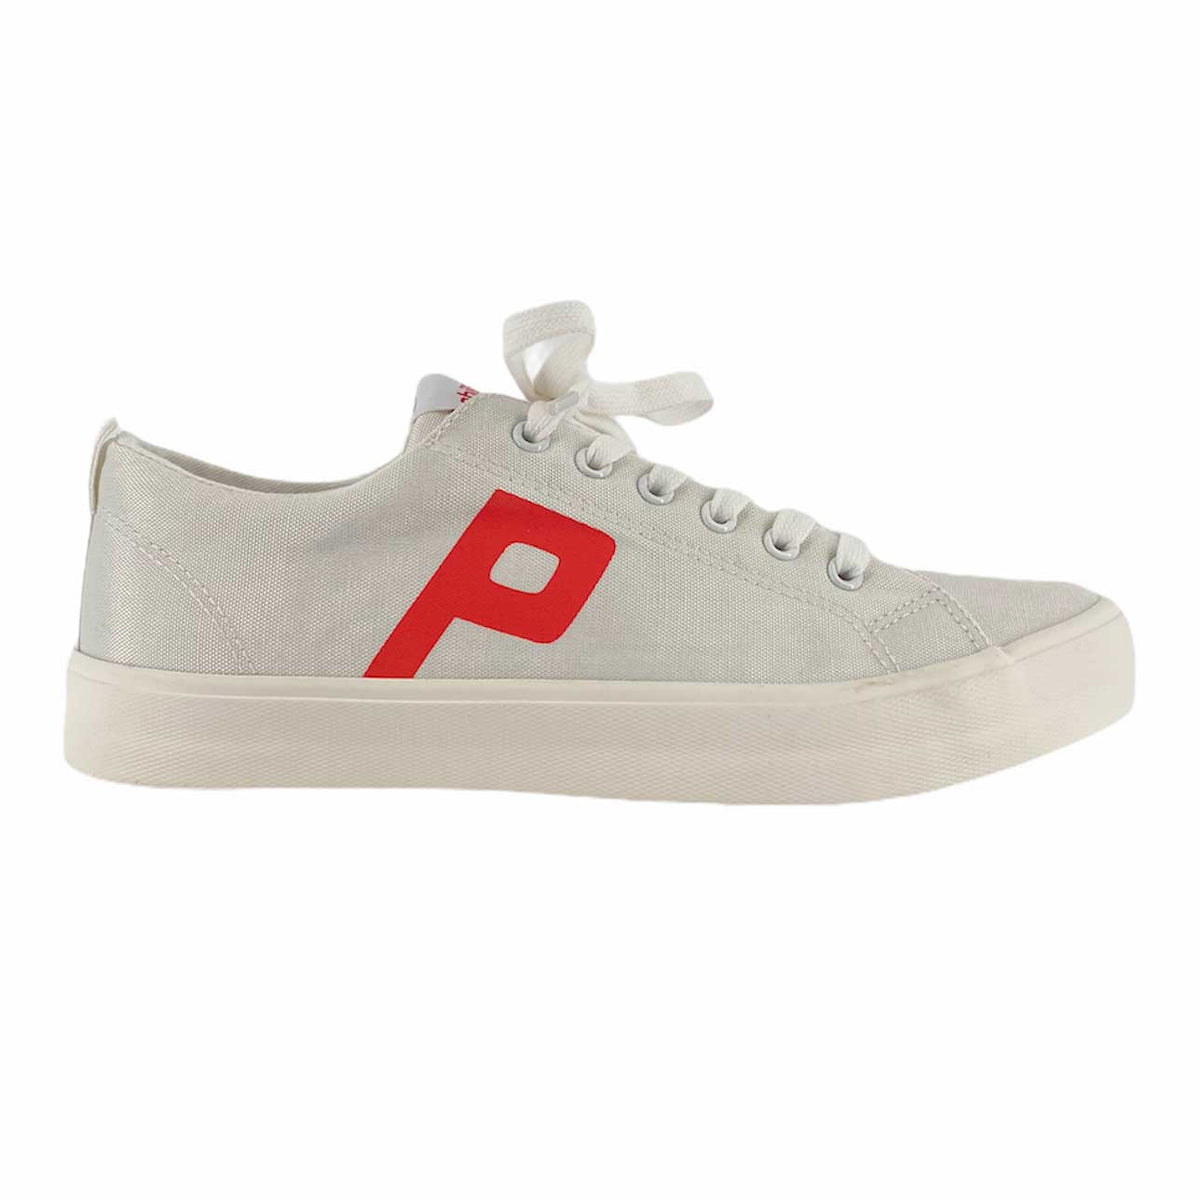 PHILIP HOG ANDREA RECYCLED SNEAKERS OFF WHITE - J BY J Fashion